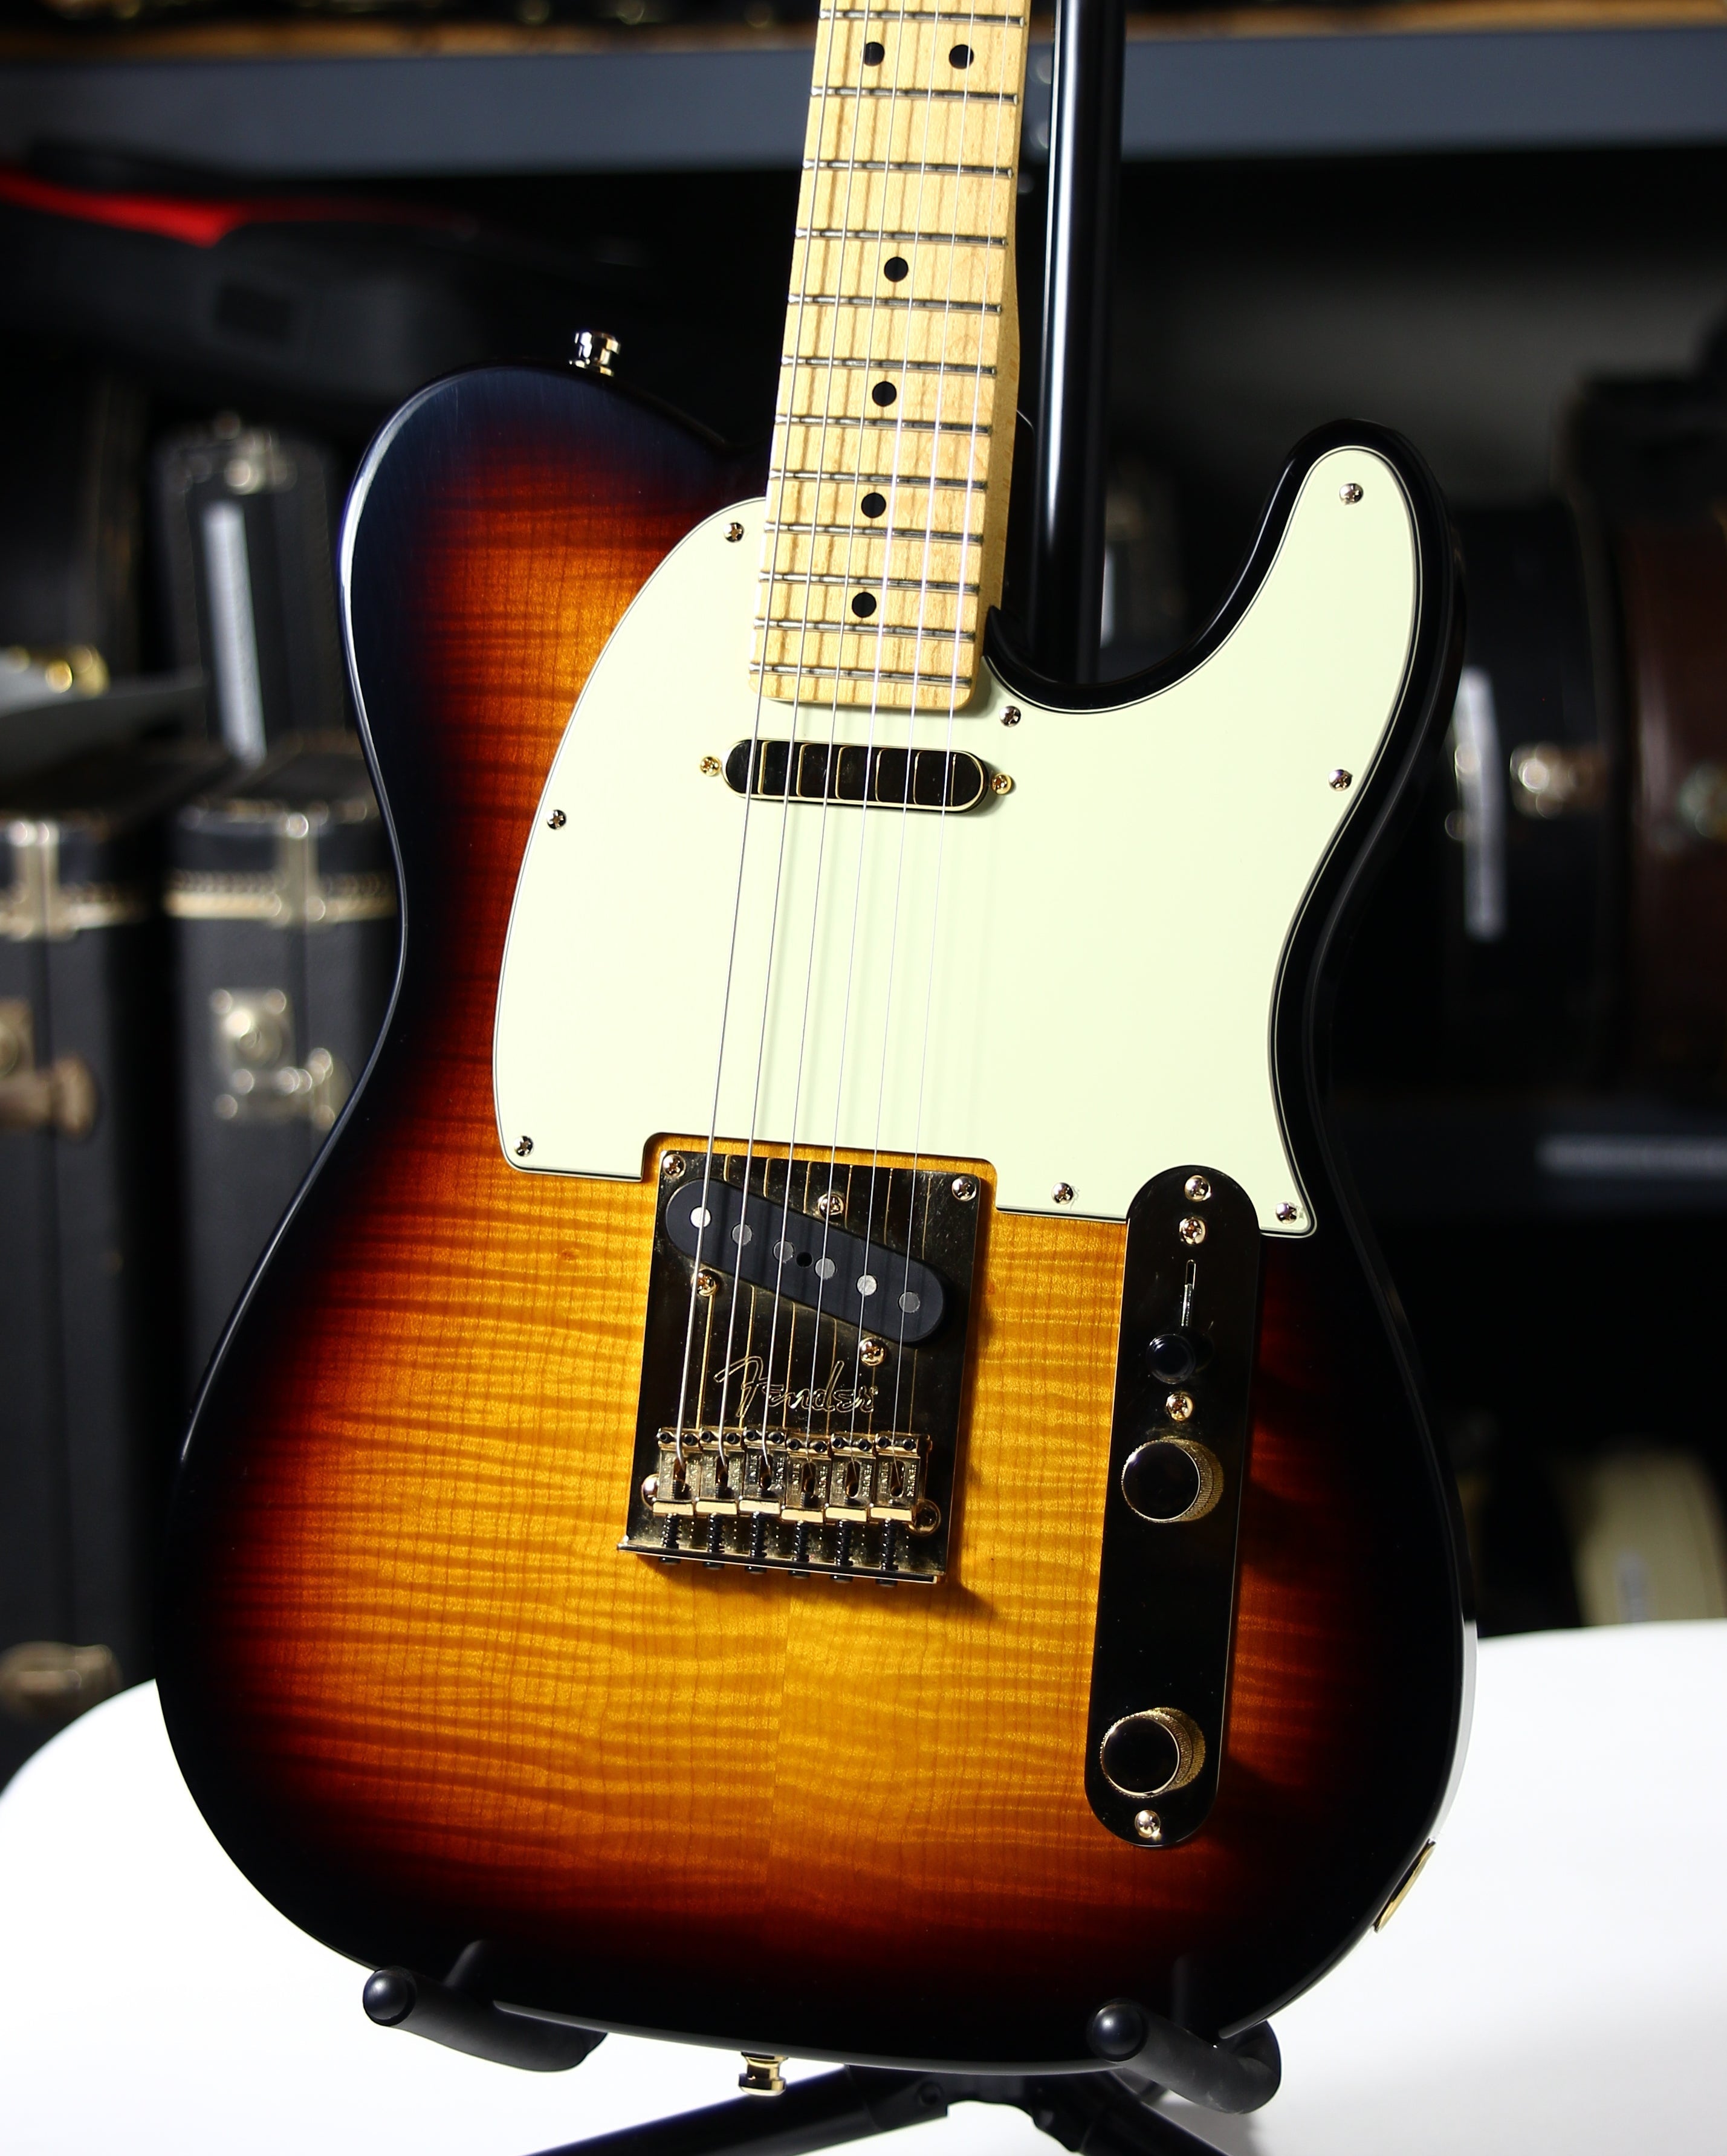 *SOLD*  2011 Fender USA American 60th Anniversary Flame Top Telecaster LIMITED EDITION Tele-Bration!